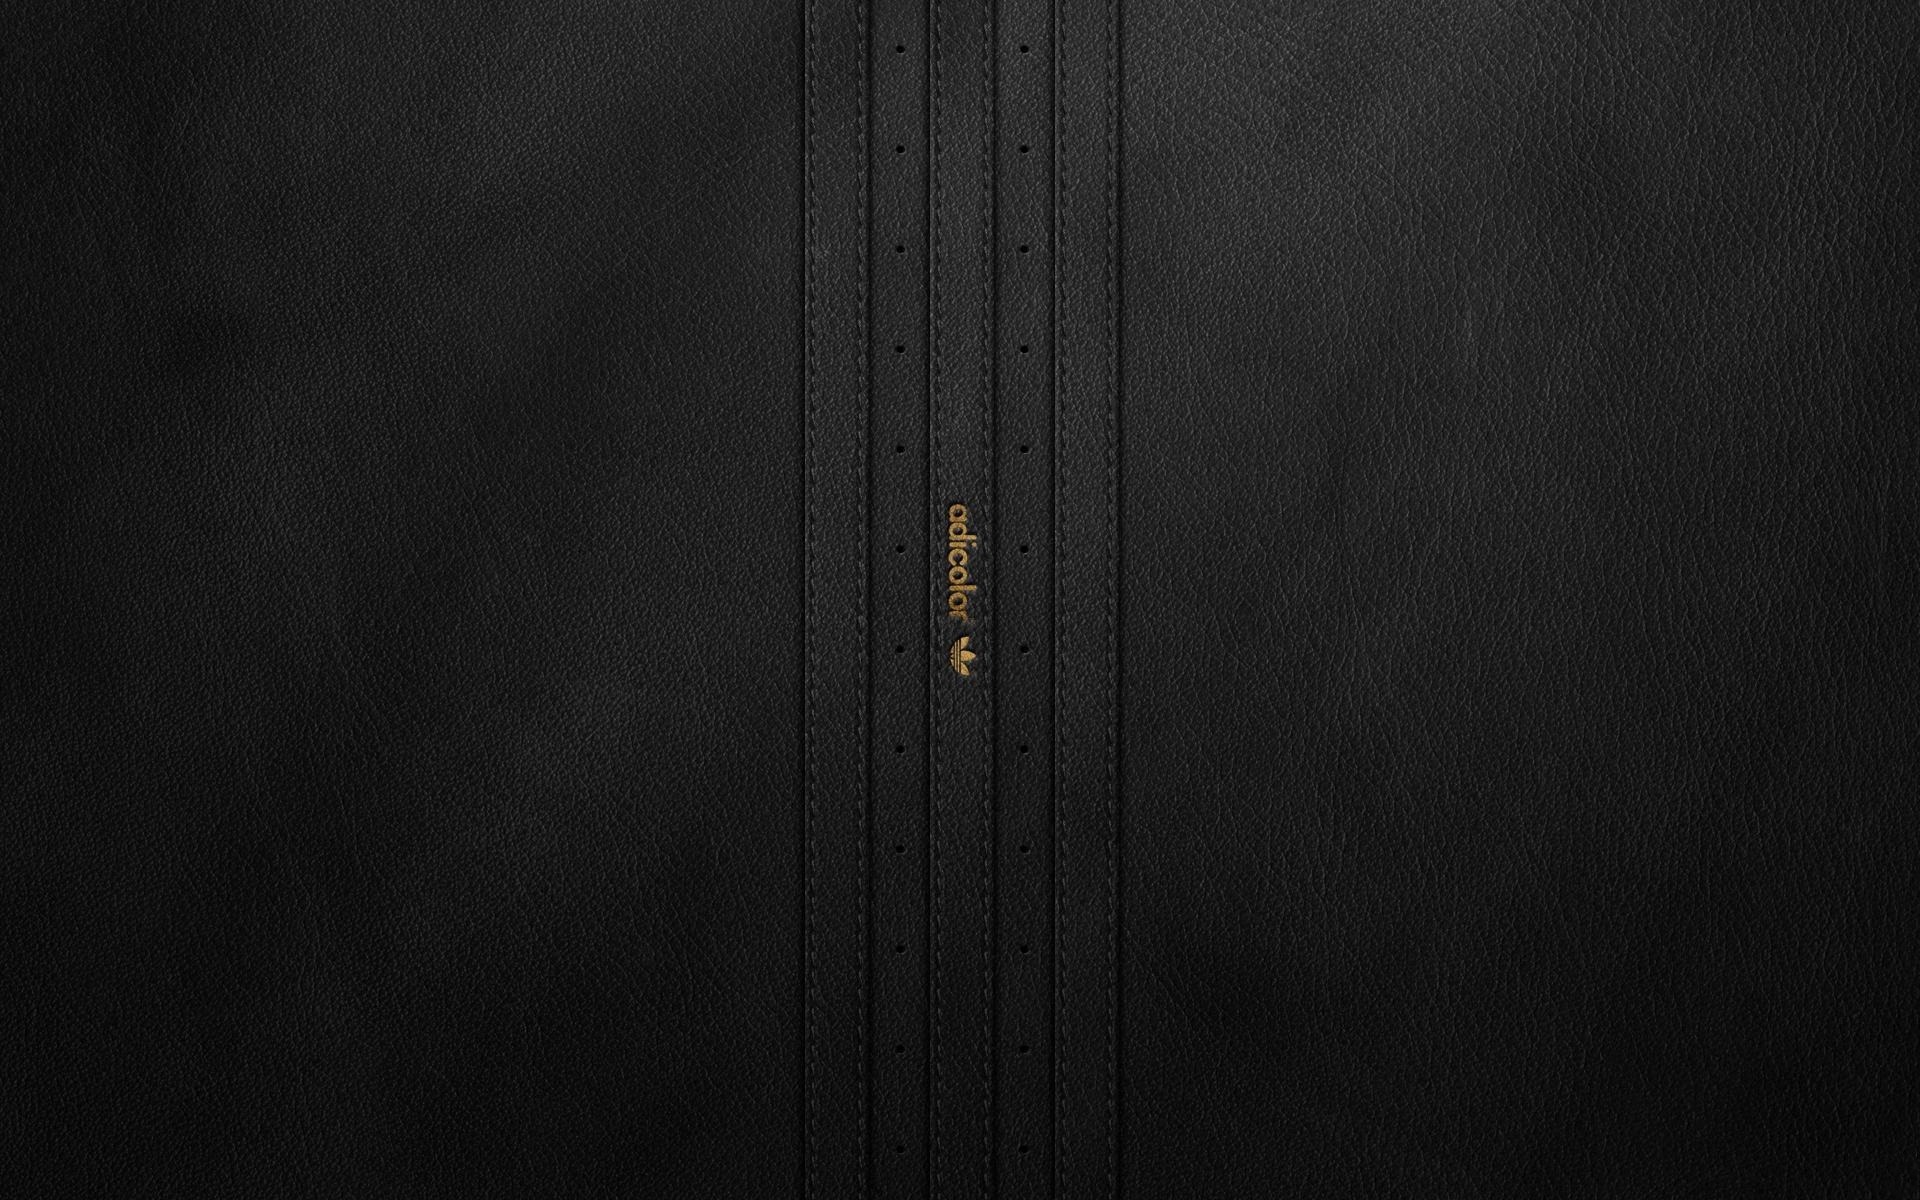 Adidas Brand Wallpaper And Image Pictures